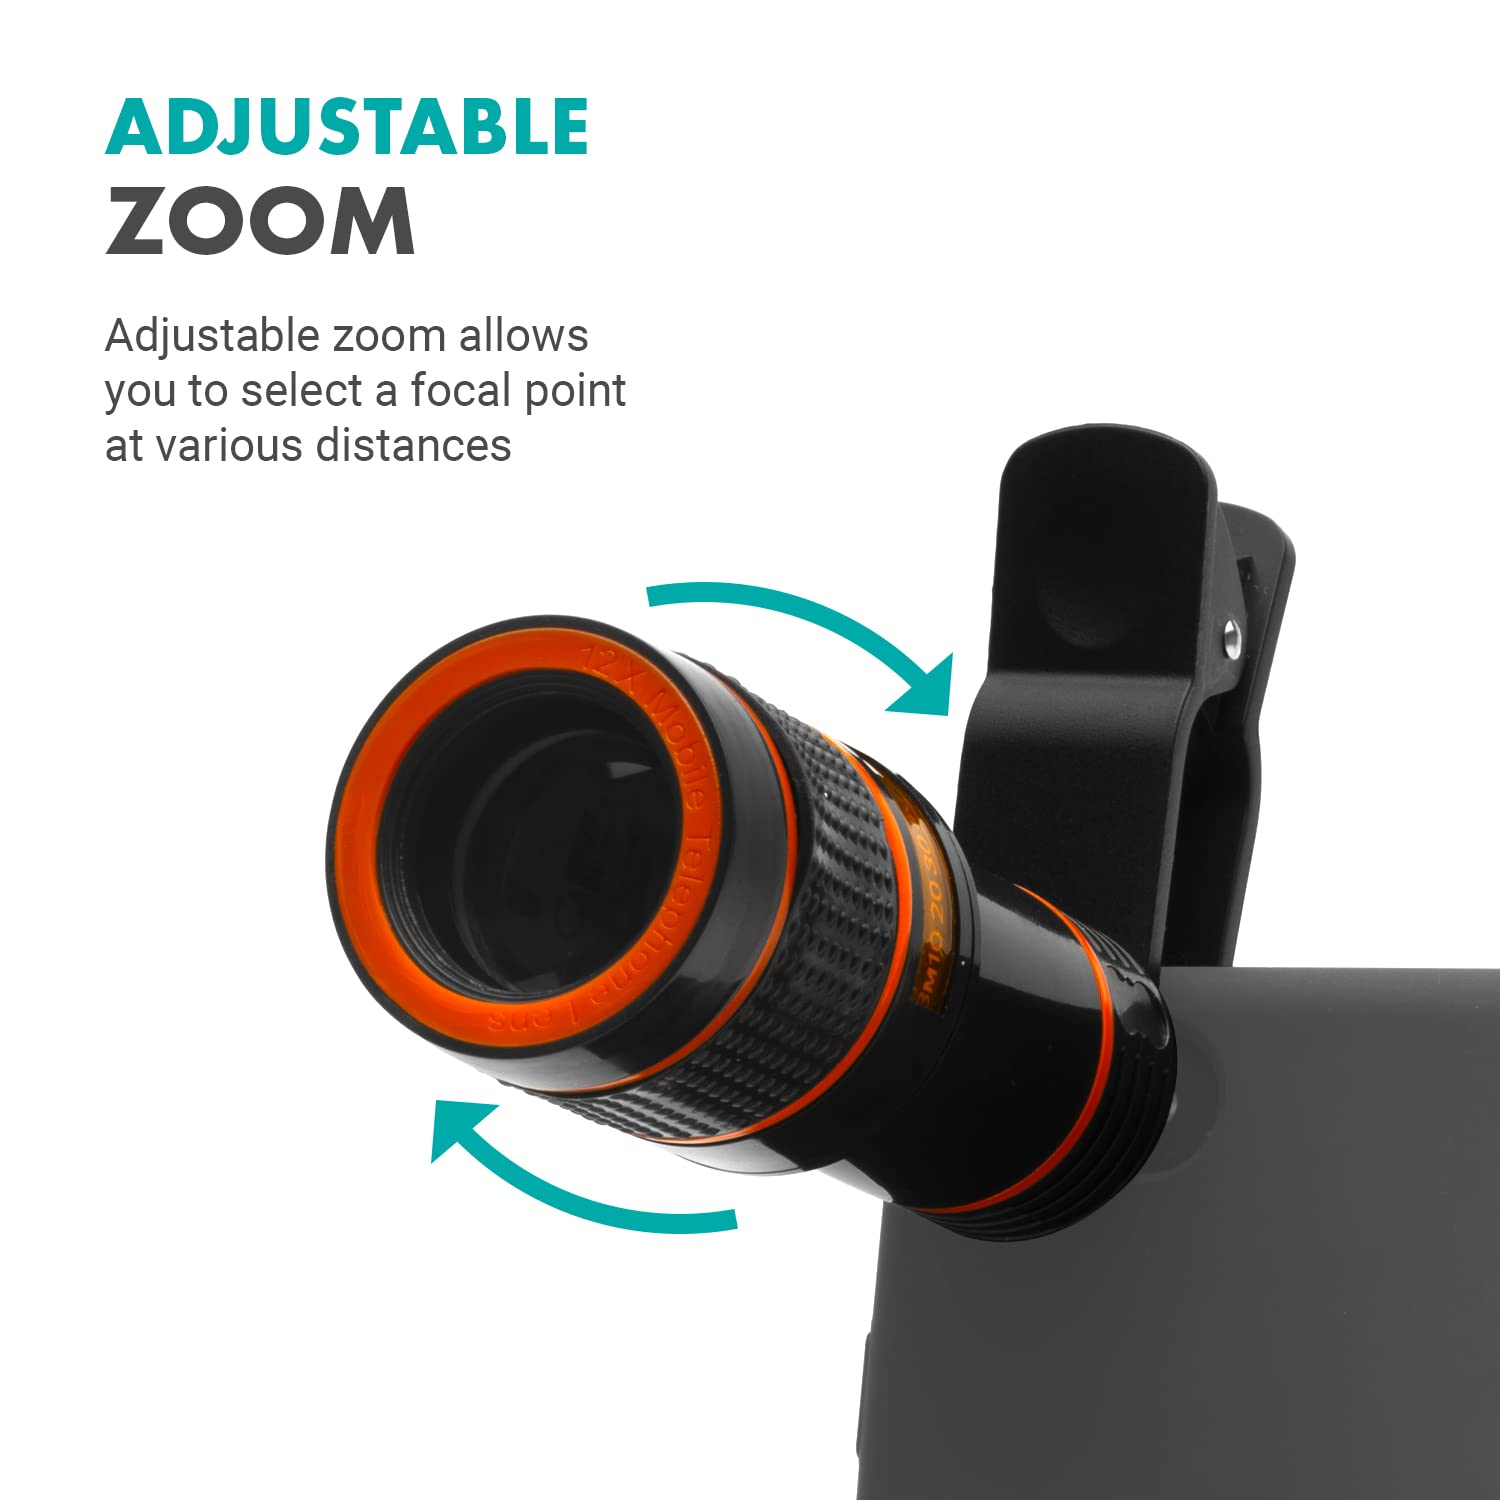 Movo SPL-ST 12X Zoom Telescope Smartphone Lens Adapter and Monocular- Clip-on Telephoto Lens for Phone with Removable Monocular Eye Cup- Telescope and Phone Camera Lens for Photography and Videography  - Very Good